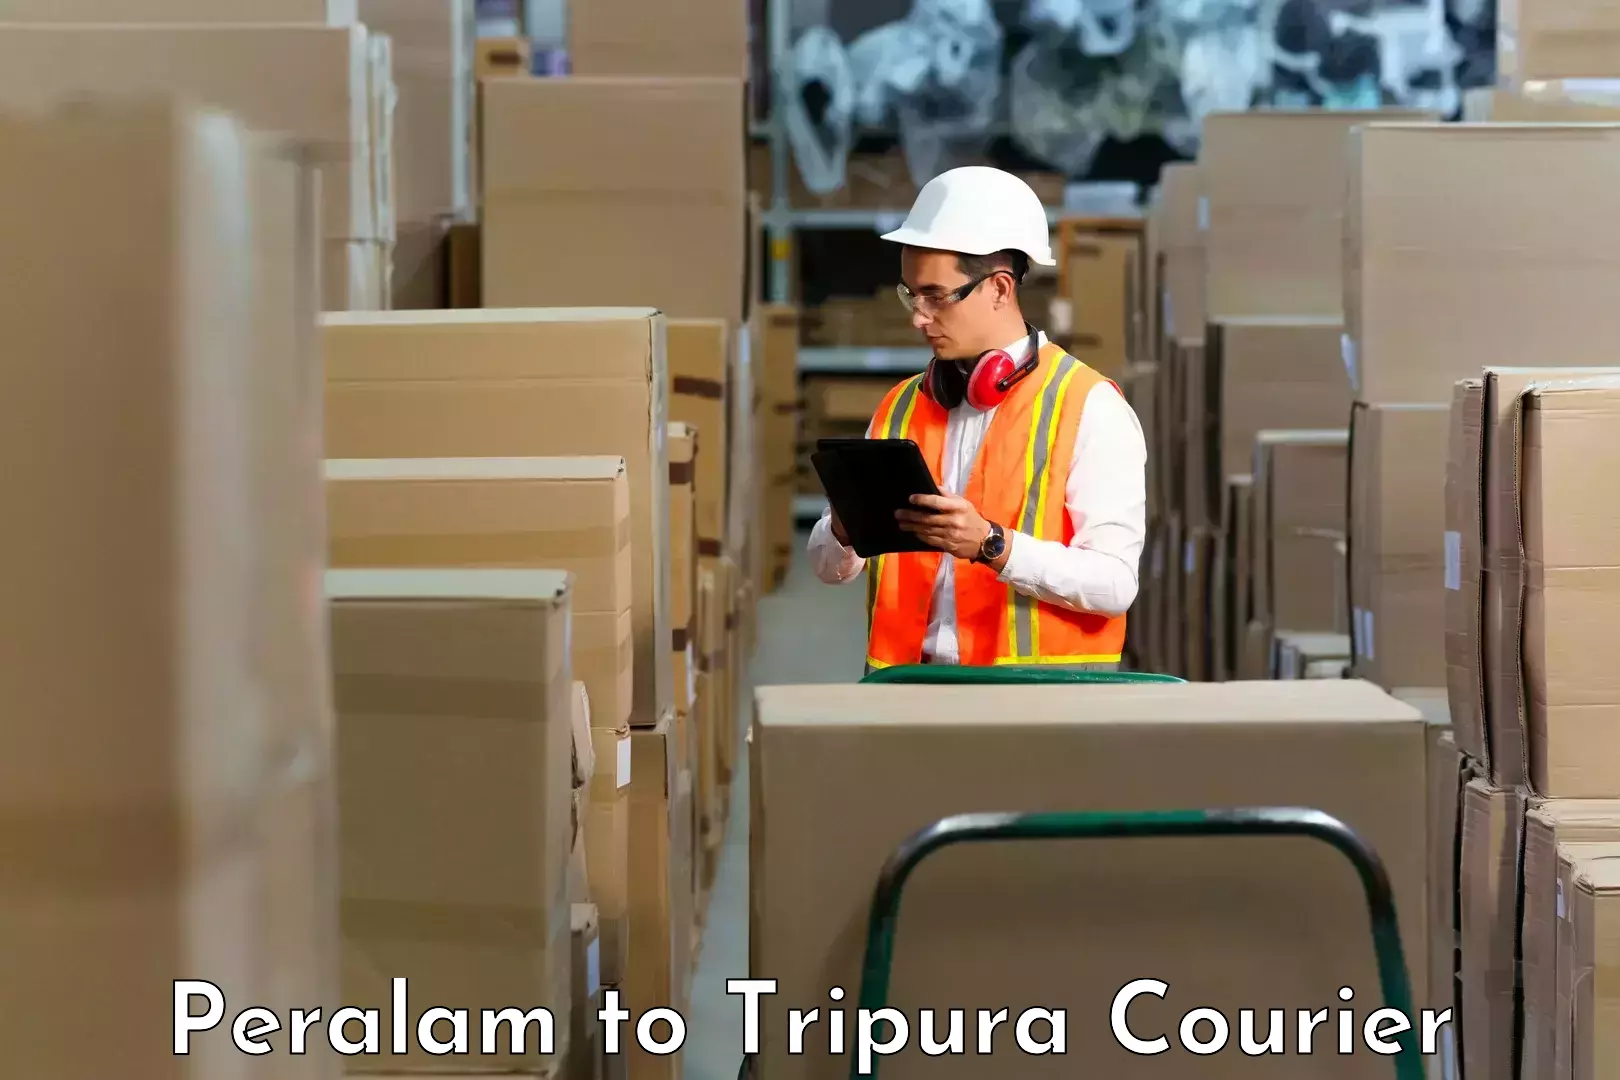 Express delivery capabilities Peralam to Udaipur Tripura